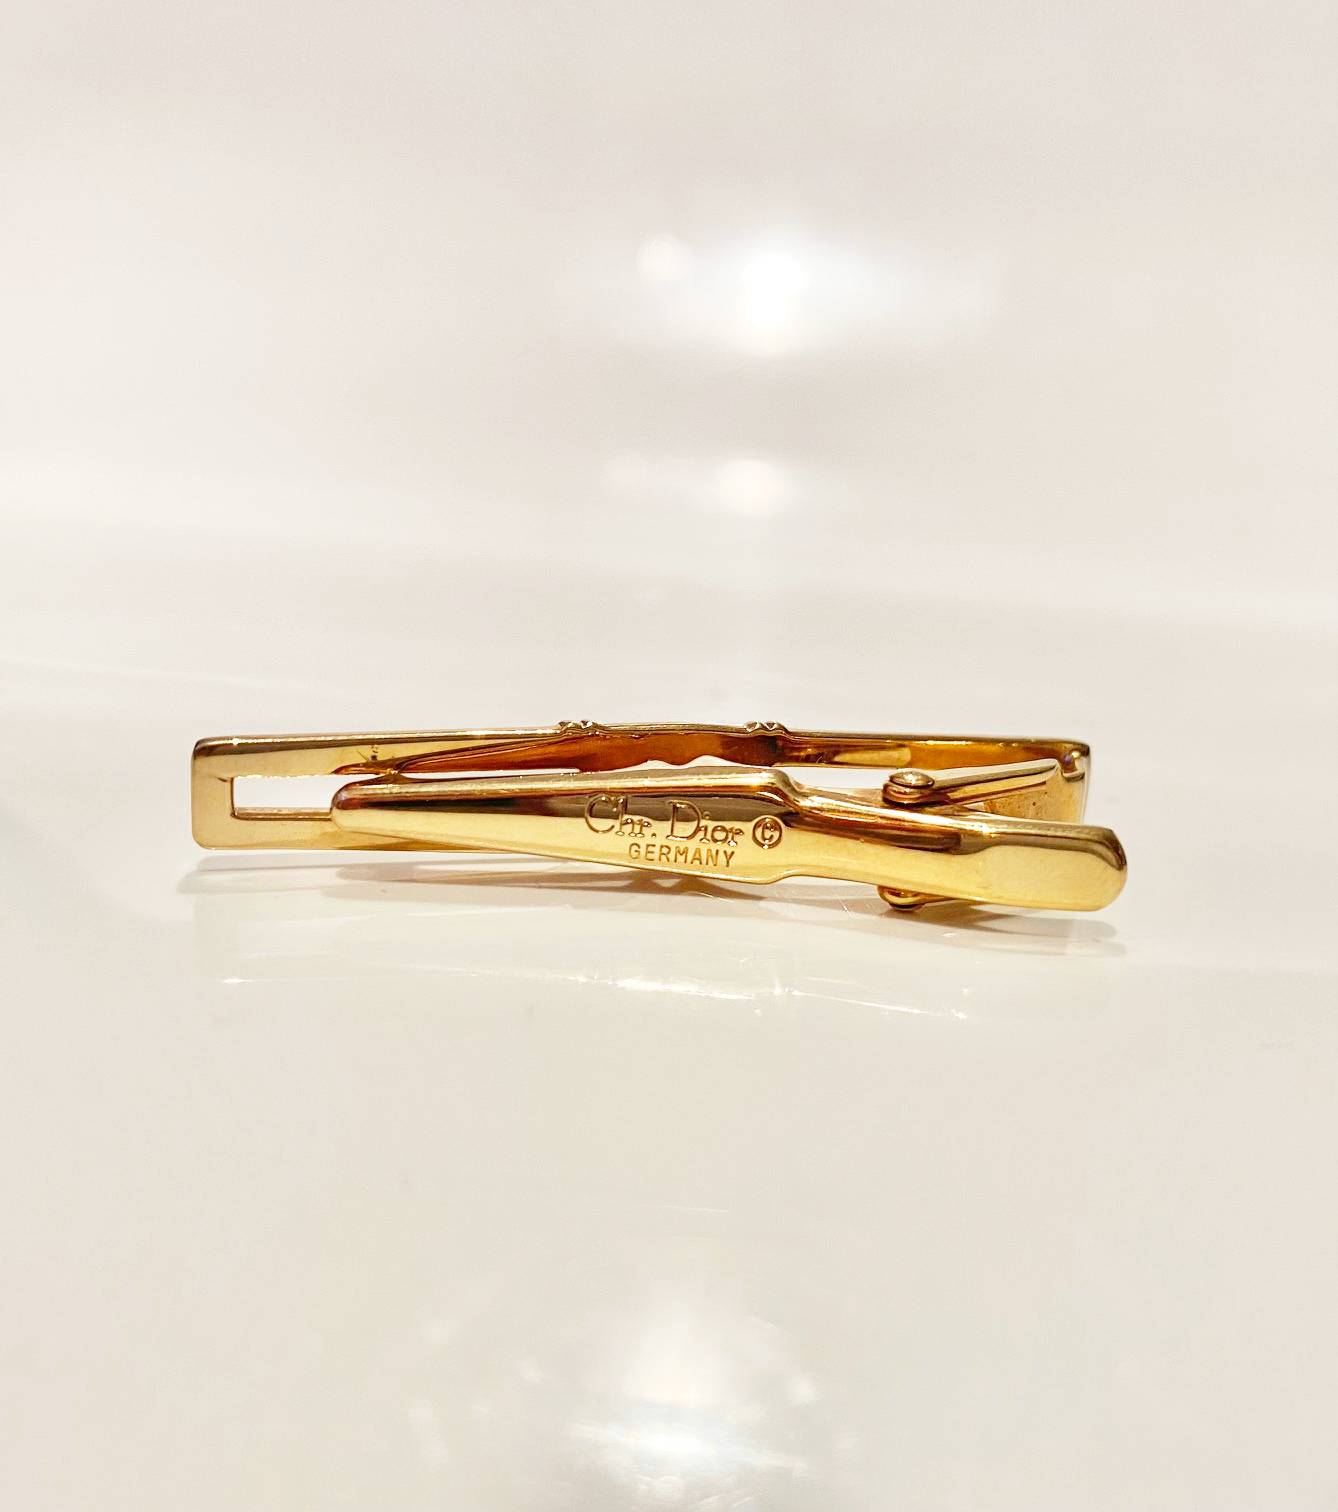 1980s Christian Dior Gold Plated Tie Paper Clip - style - CHNGR